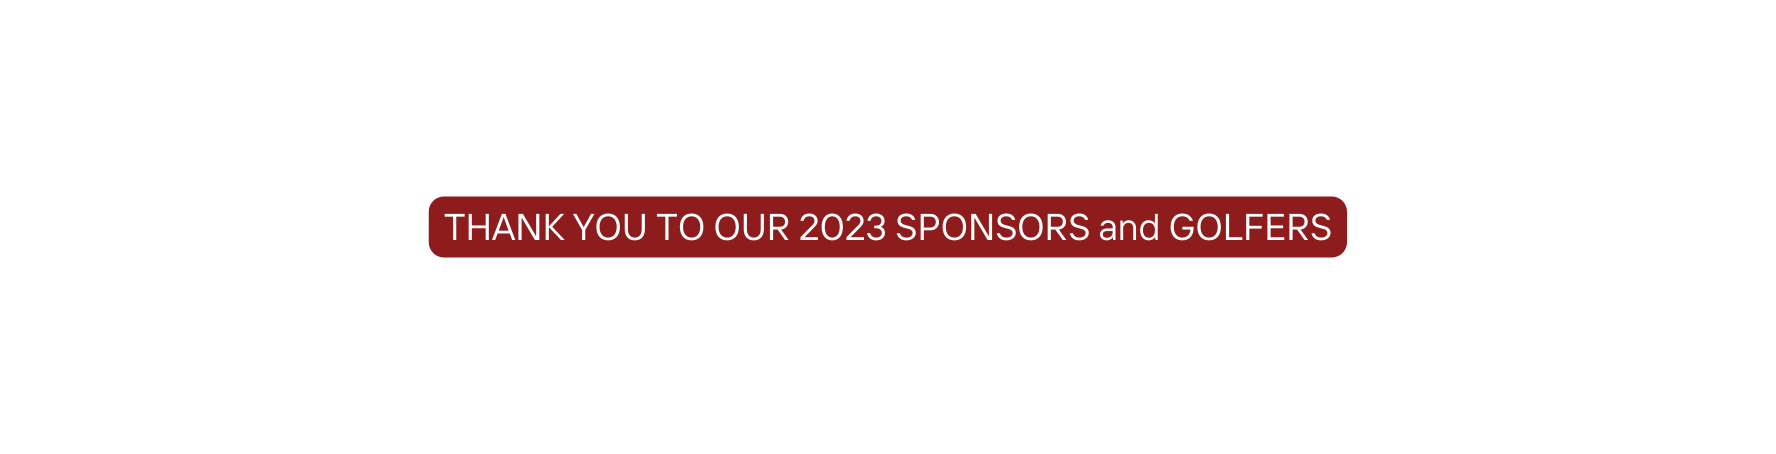 THANK YOU TO OUR 2023 SPONSORS and GOLFERS